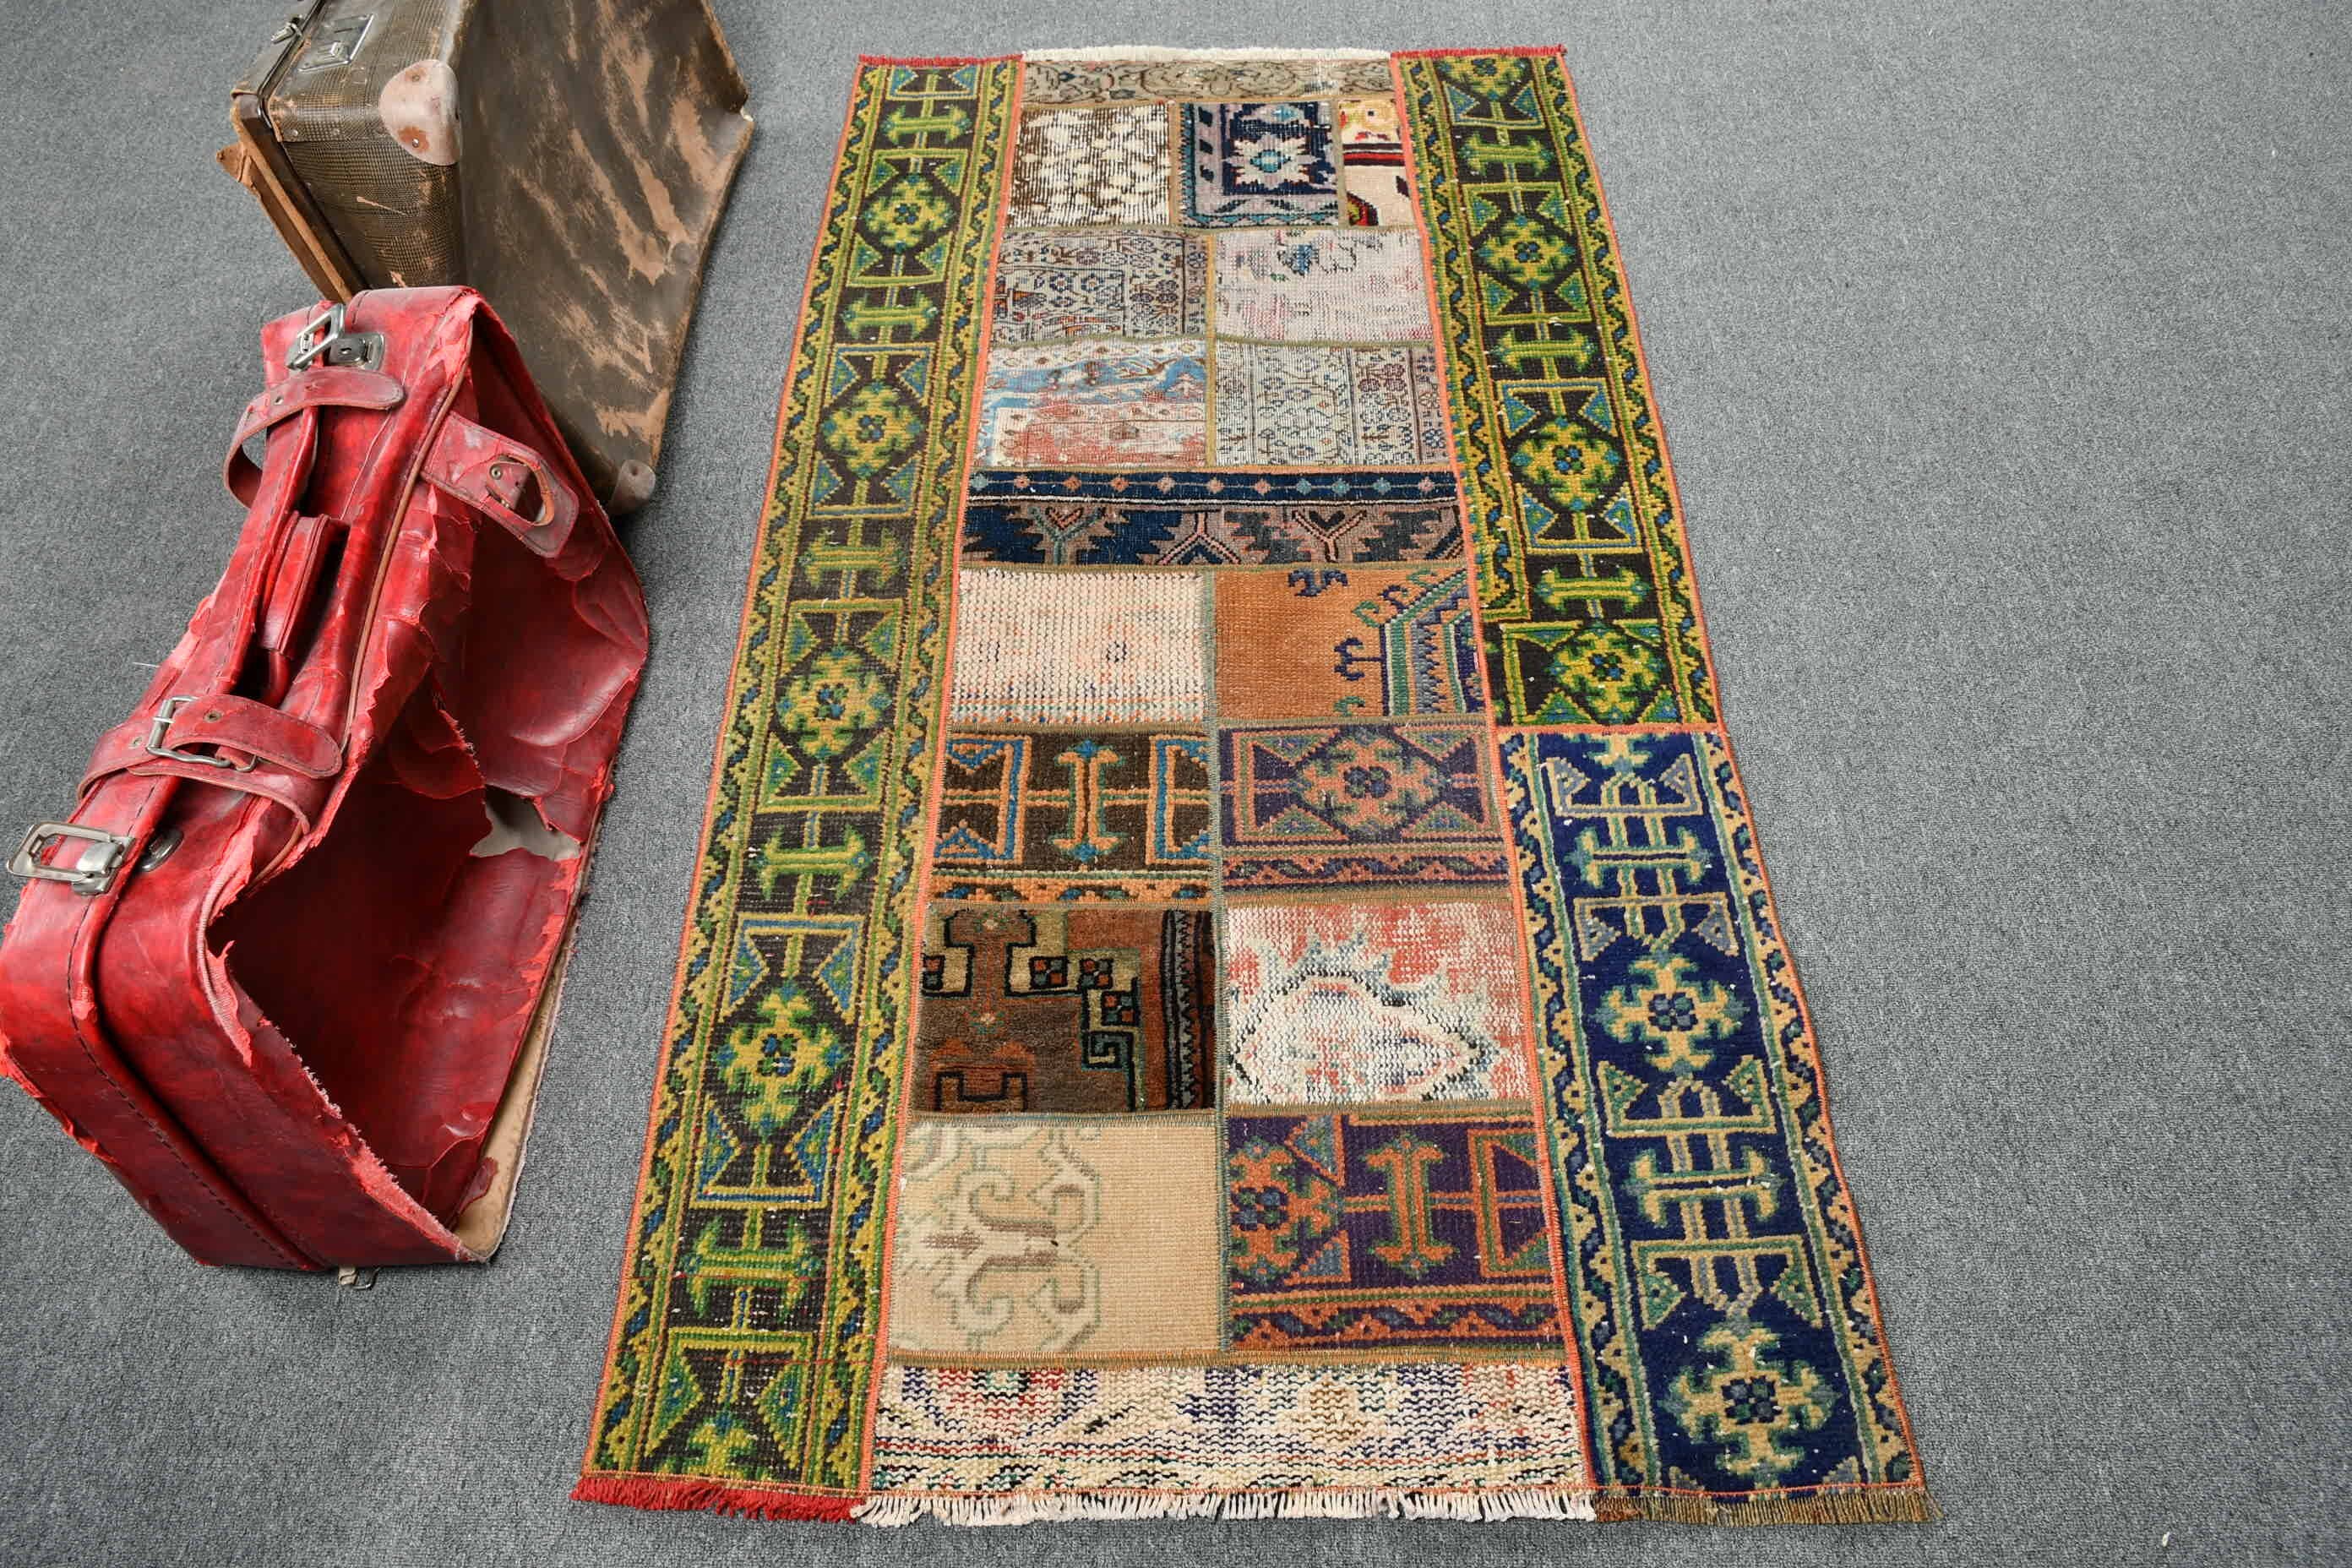 Rugs for Kitchen, Kitchen Rugs, Turkish Rugs, 2.9x5.5 ft Accent Rug, Moroccan Rugs, Green Floor Rugs, Vintage Rug, Tribal Rugs, Bedroom Rug